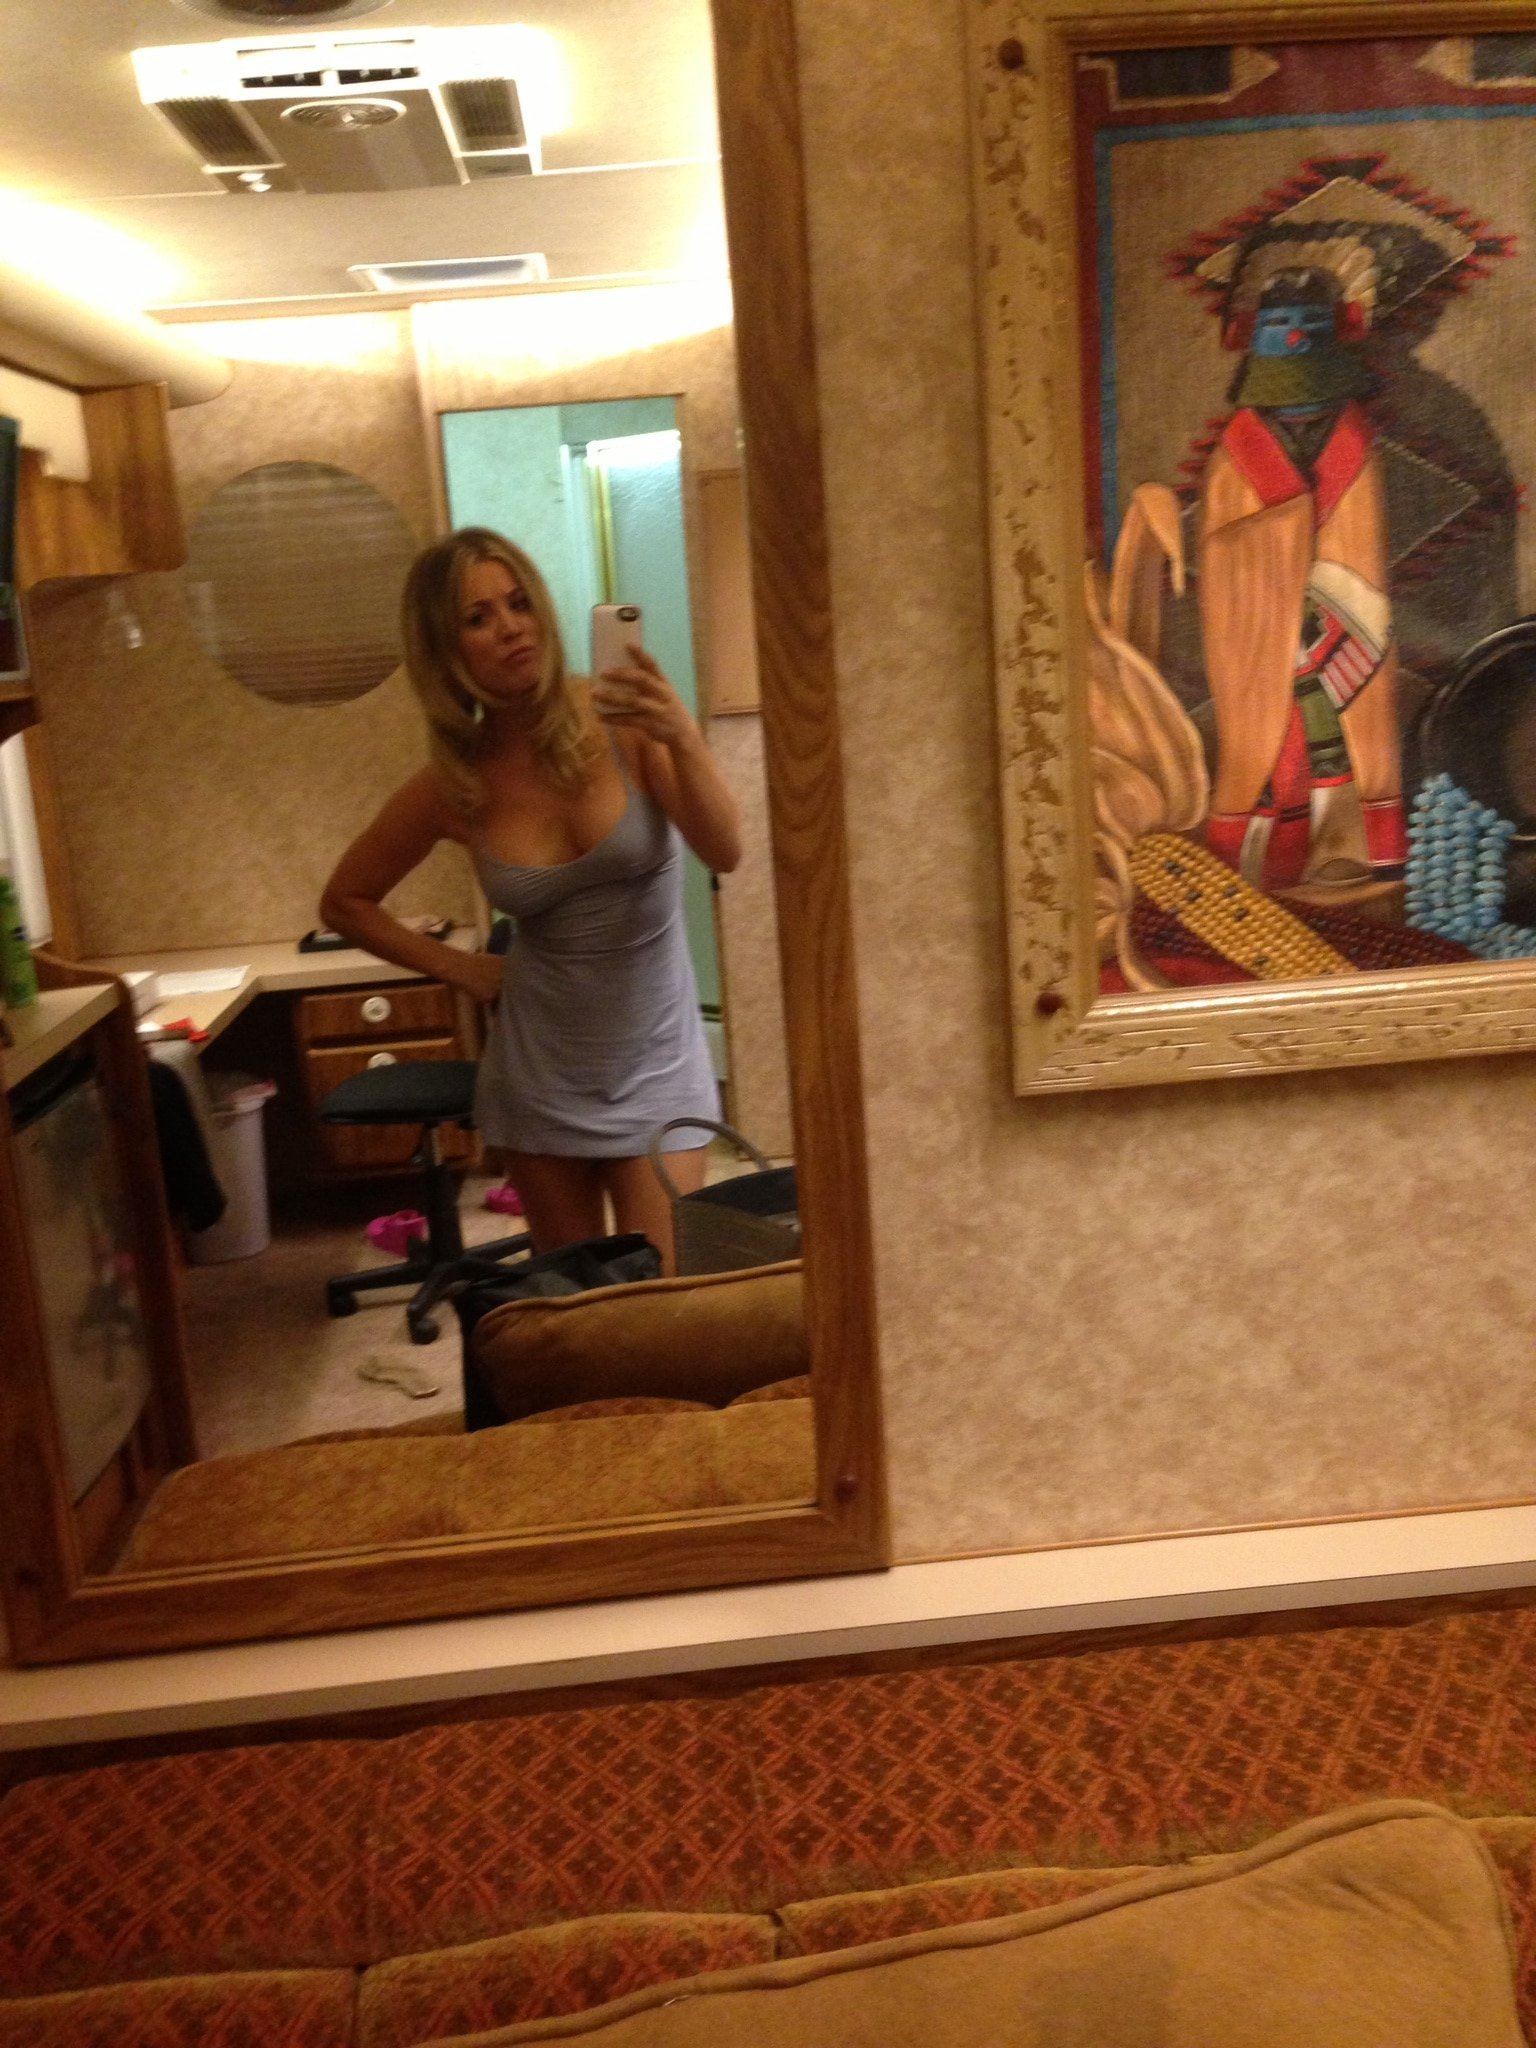 icloud leaked pic of kaley cuoco in a little dress showing off her cleavage